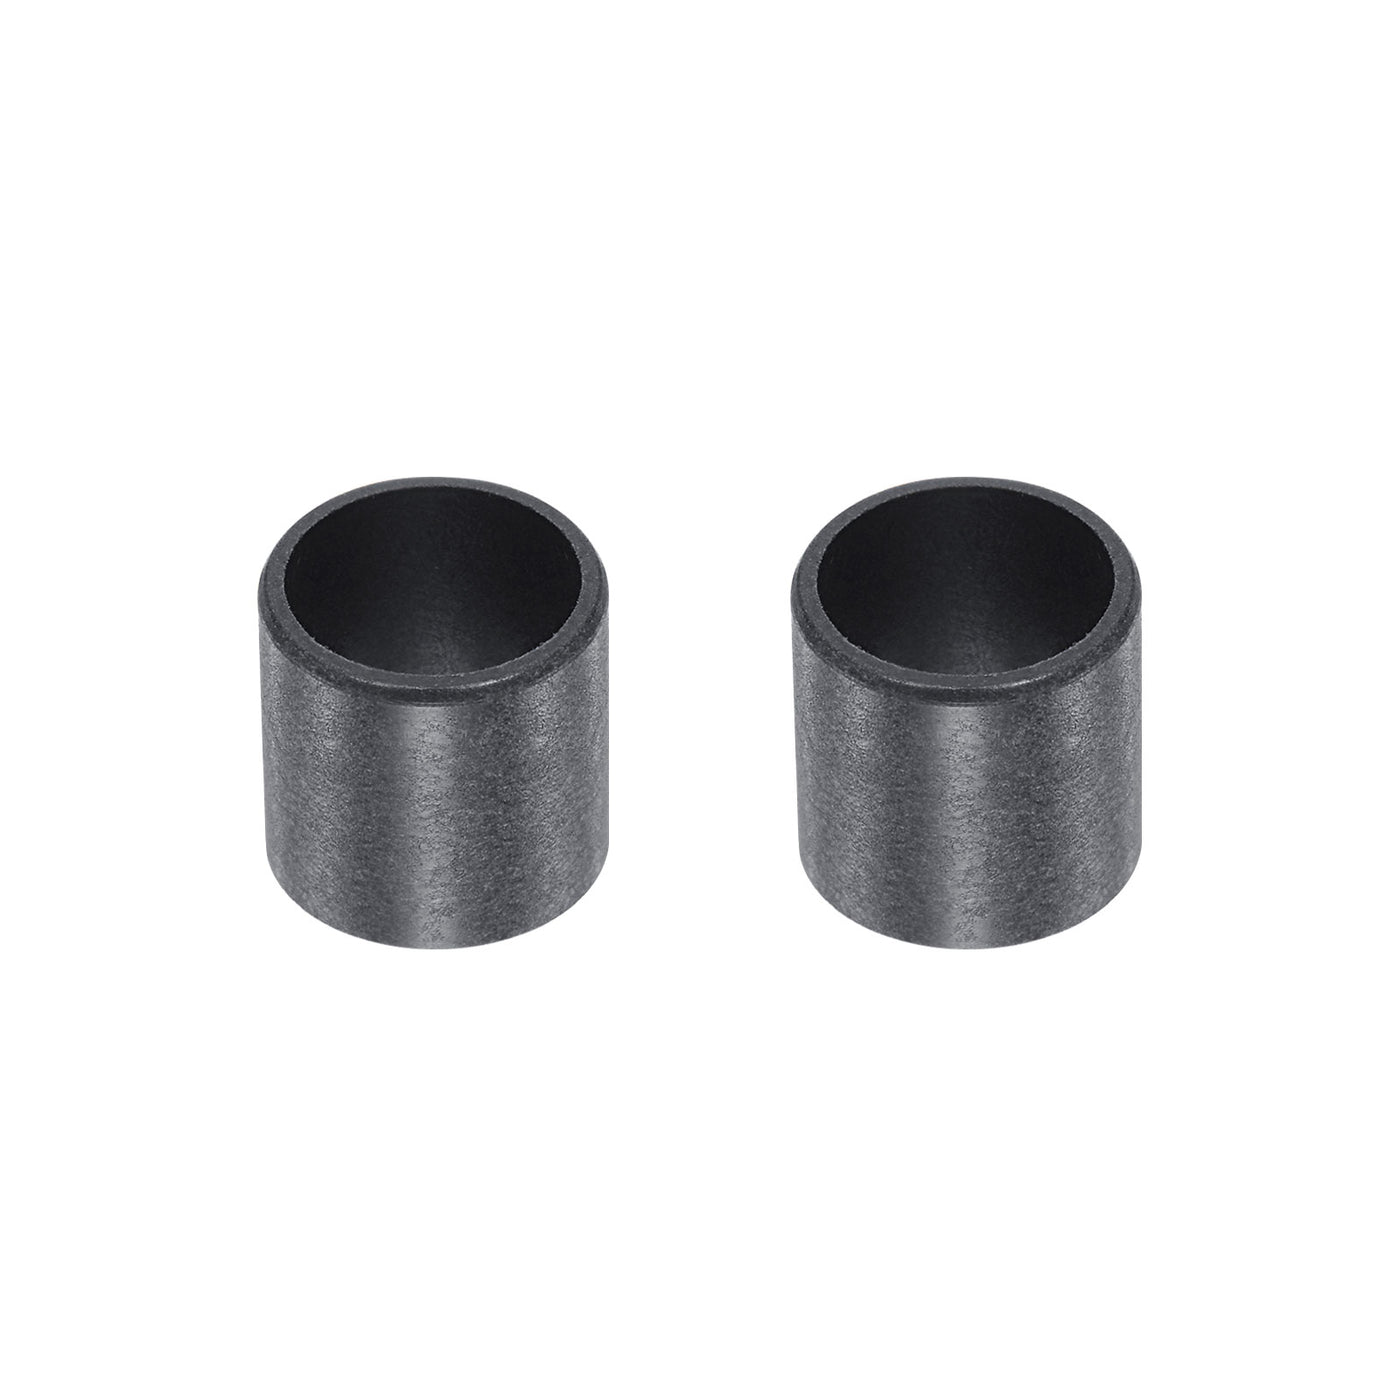 uxcell Uxcell Sleeve Bearings 10mmx12mmx10mm POM Wrapped Oilless Bushings Black 2pcs